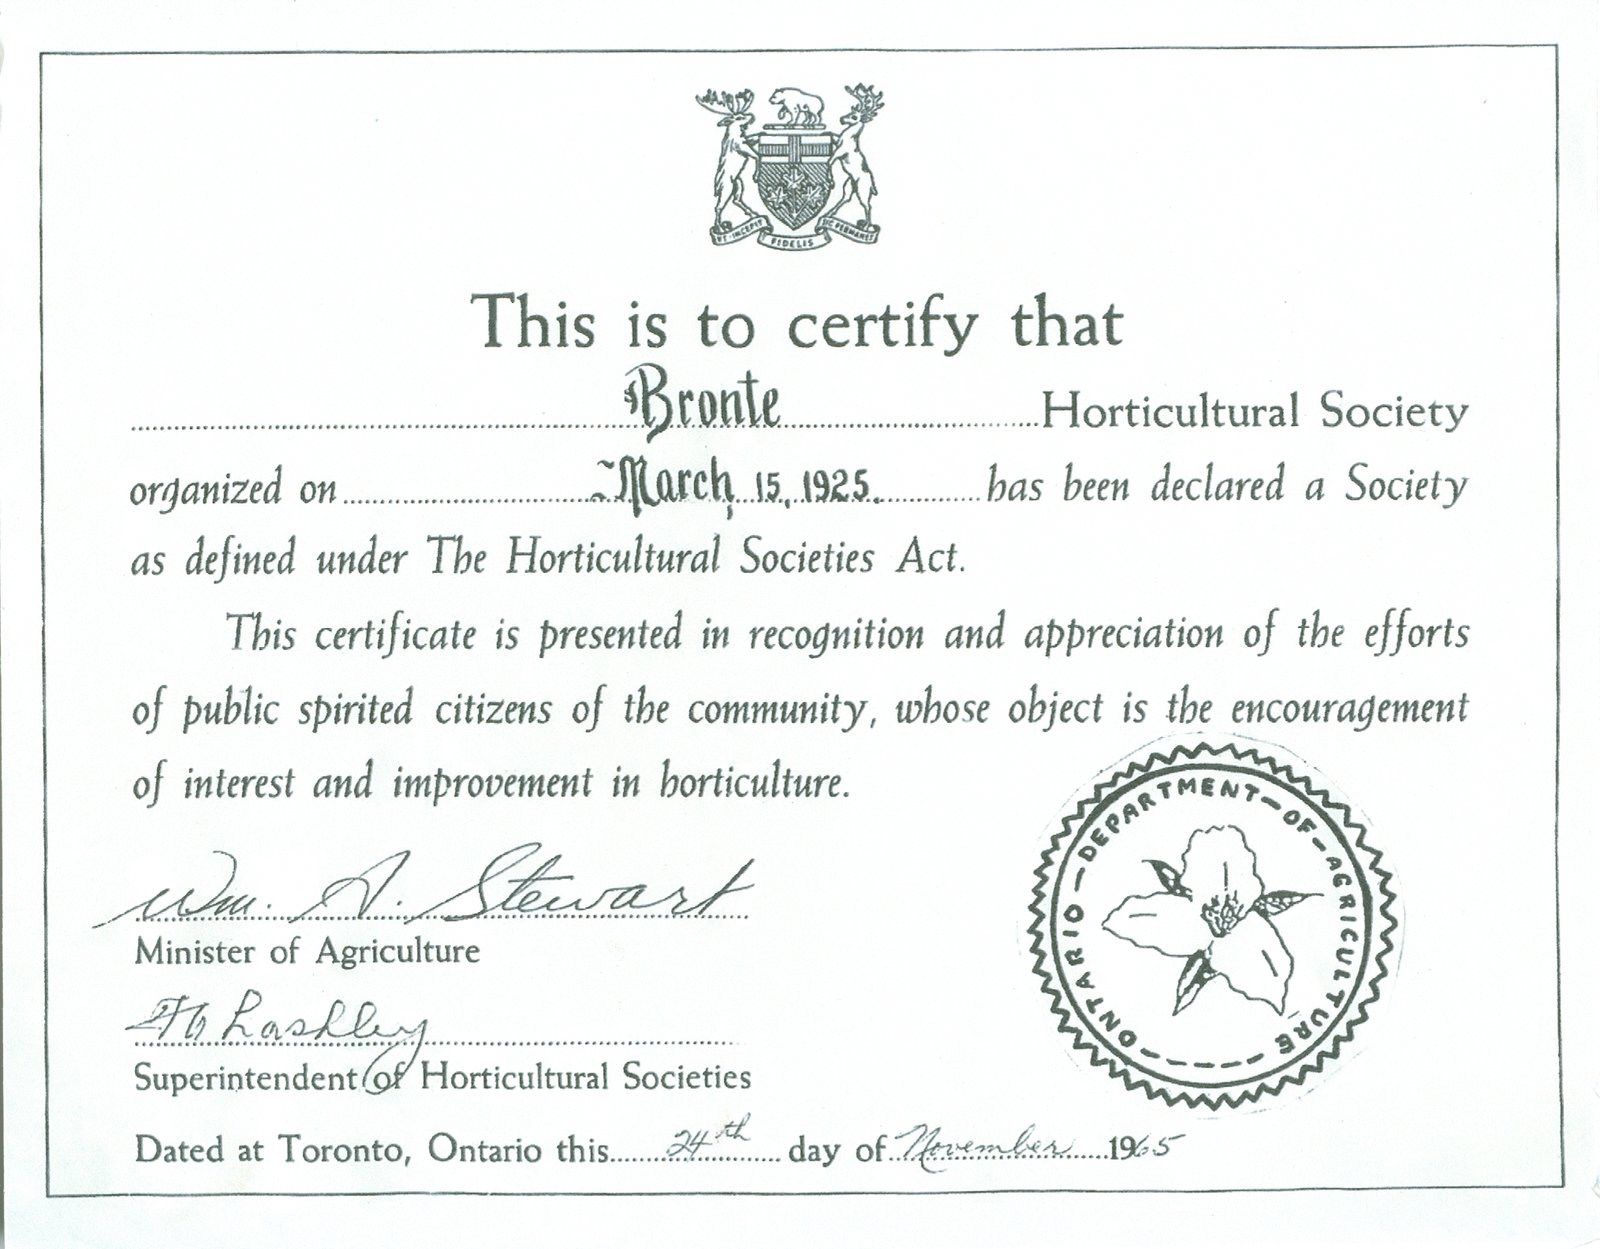 Bronte Horticultural Society certificate from the Ontario Department of Agriculture (1965)